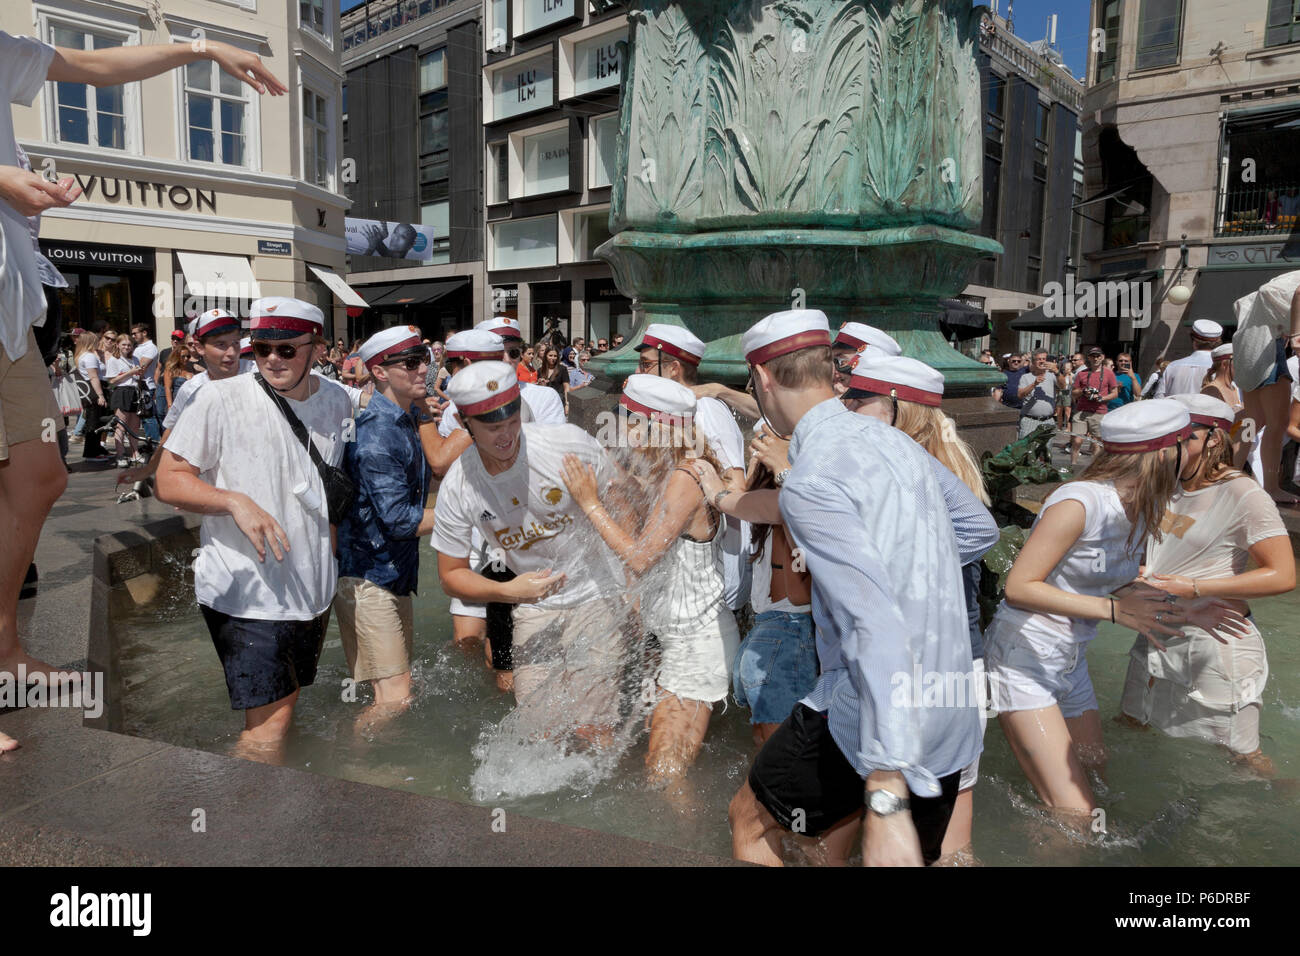 Copenhagen, Denmark. June 29, 2018. Happy, Danish students celebrate their high school, grammar school graduation and take the plunge. A dance around and a dip or dive into the cold water of the Stork Fountain (Storkespringvandet) on the pedestrian street, Stroeget, is a traditional element on the day of celebration for  graduated students in Greater Copenhagen. It is often part of the long, exhausting and high-spirited truck tour visiting each student’s home for refreshments. Credit: Niels Quist/Alamy Live News Stock Photo